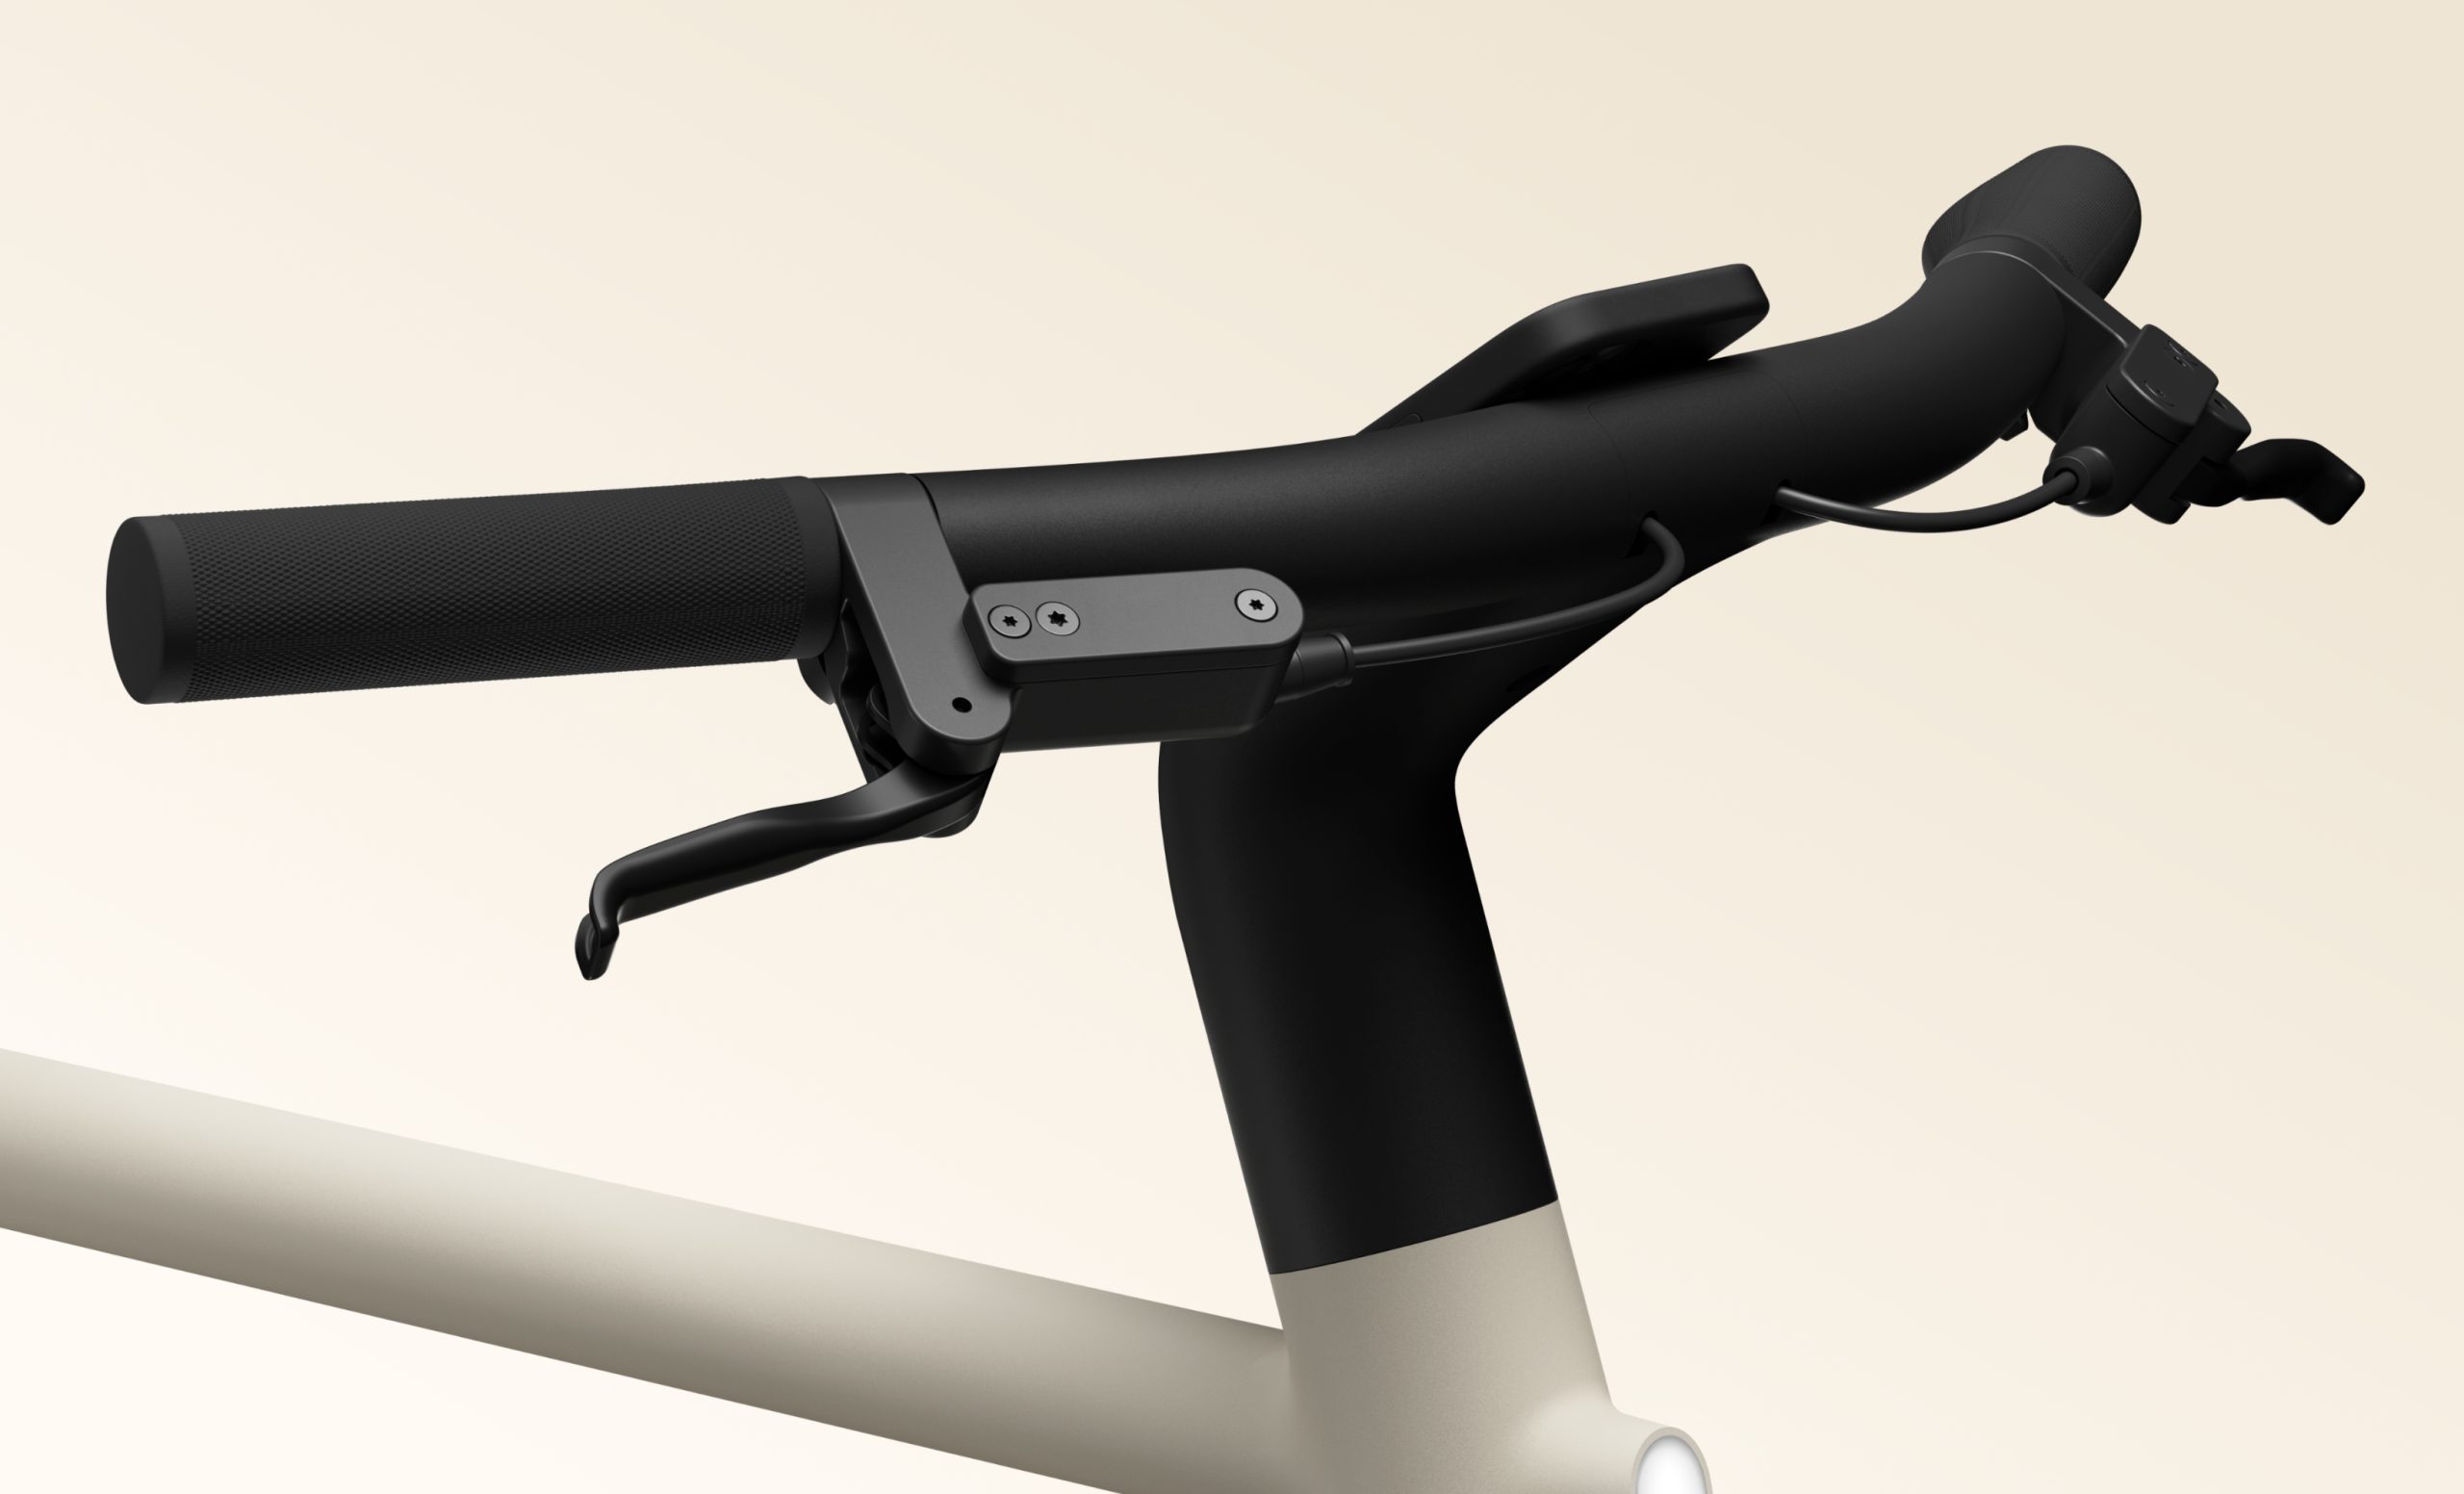 Front-side view of the Cowboy Cruiser e-bike handlebars. A phone is mounted in the center. | DeviceDaily.com